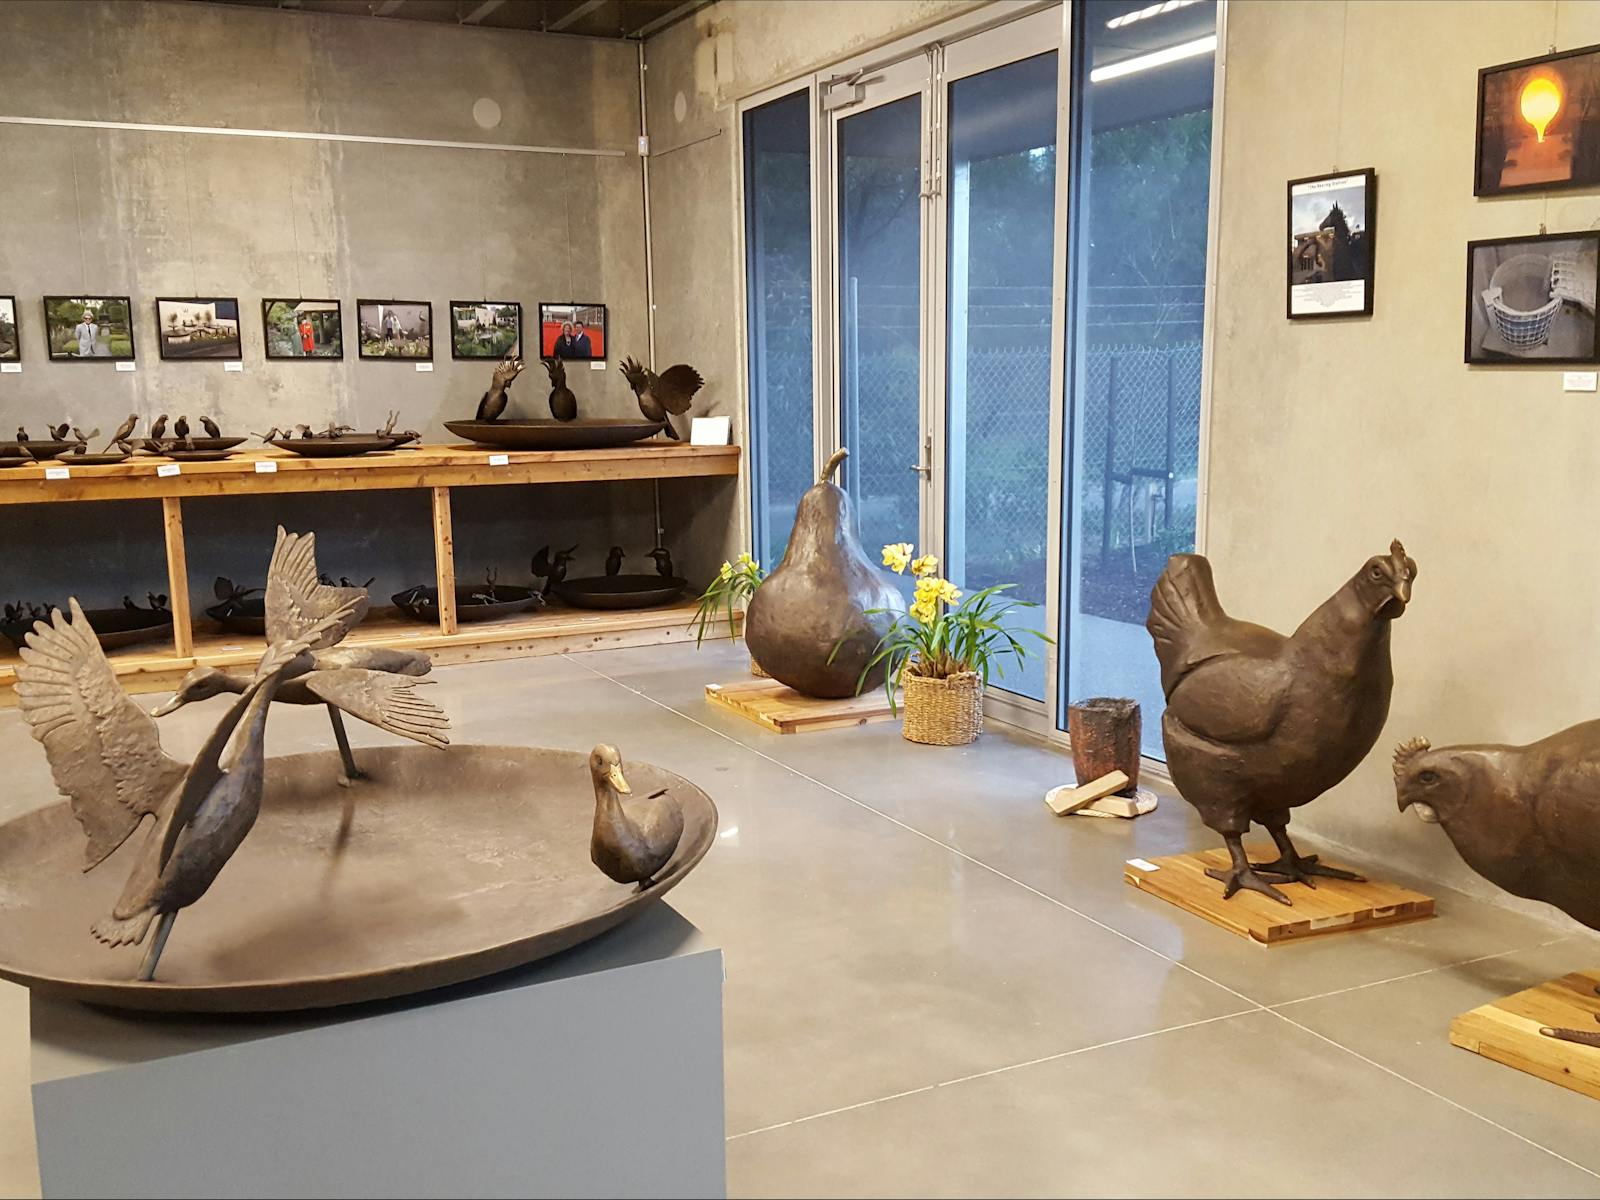 Willie Wildlife Sculptures bronze works on display downstairs at The Hive